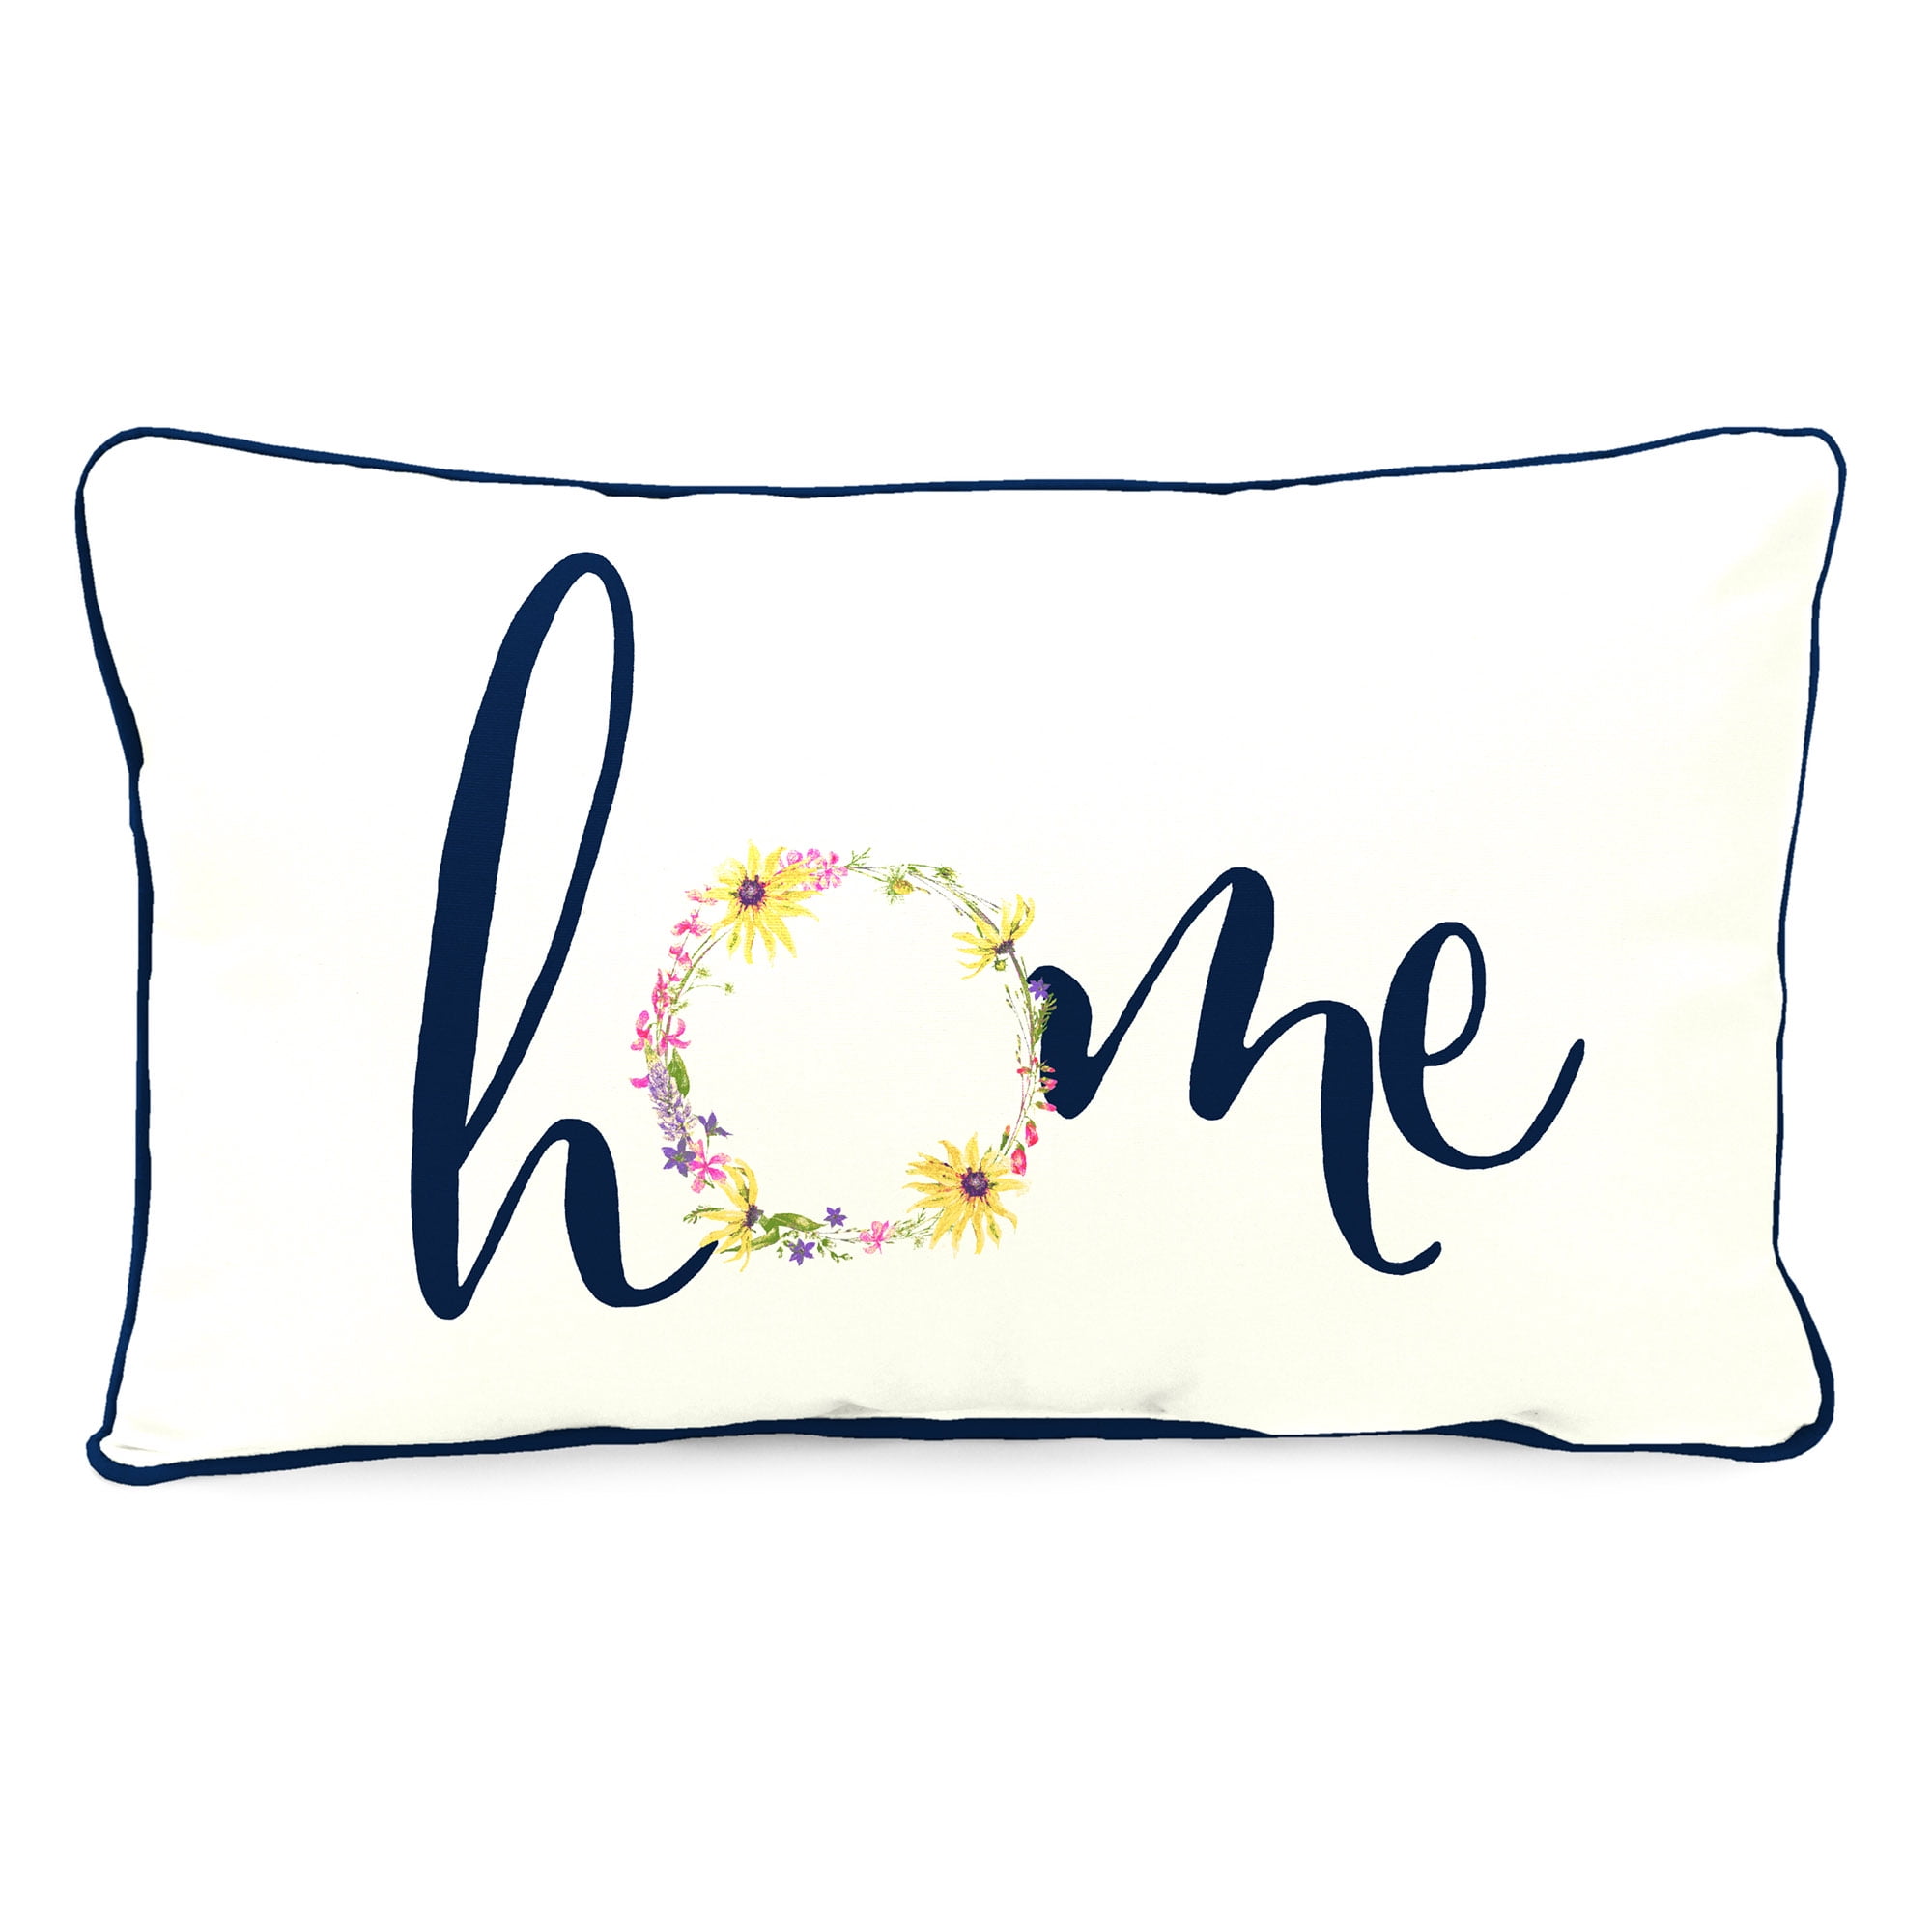 Mainstays Home Flower Wreath Reversible Outdoor Throw Pillow, 12" x 16", White Novelty and Navy Solid